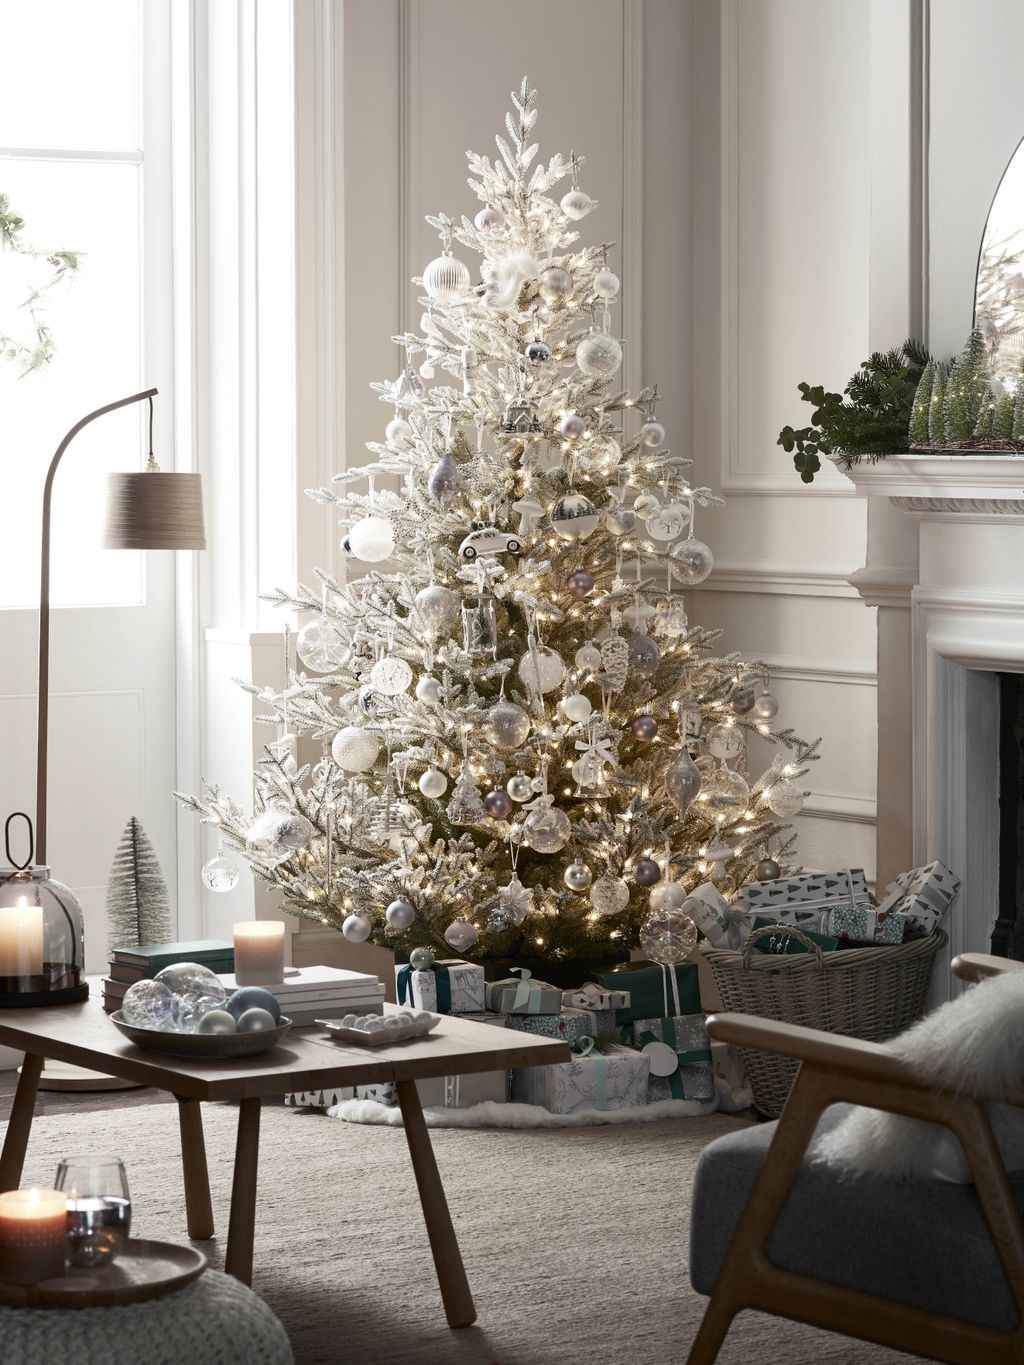 How to decorate a Christmas tree step-by-step | Real Homes